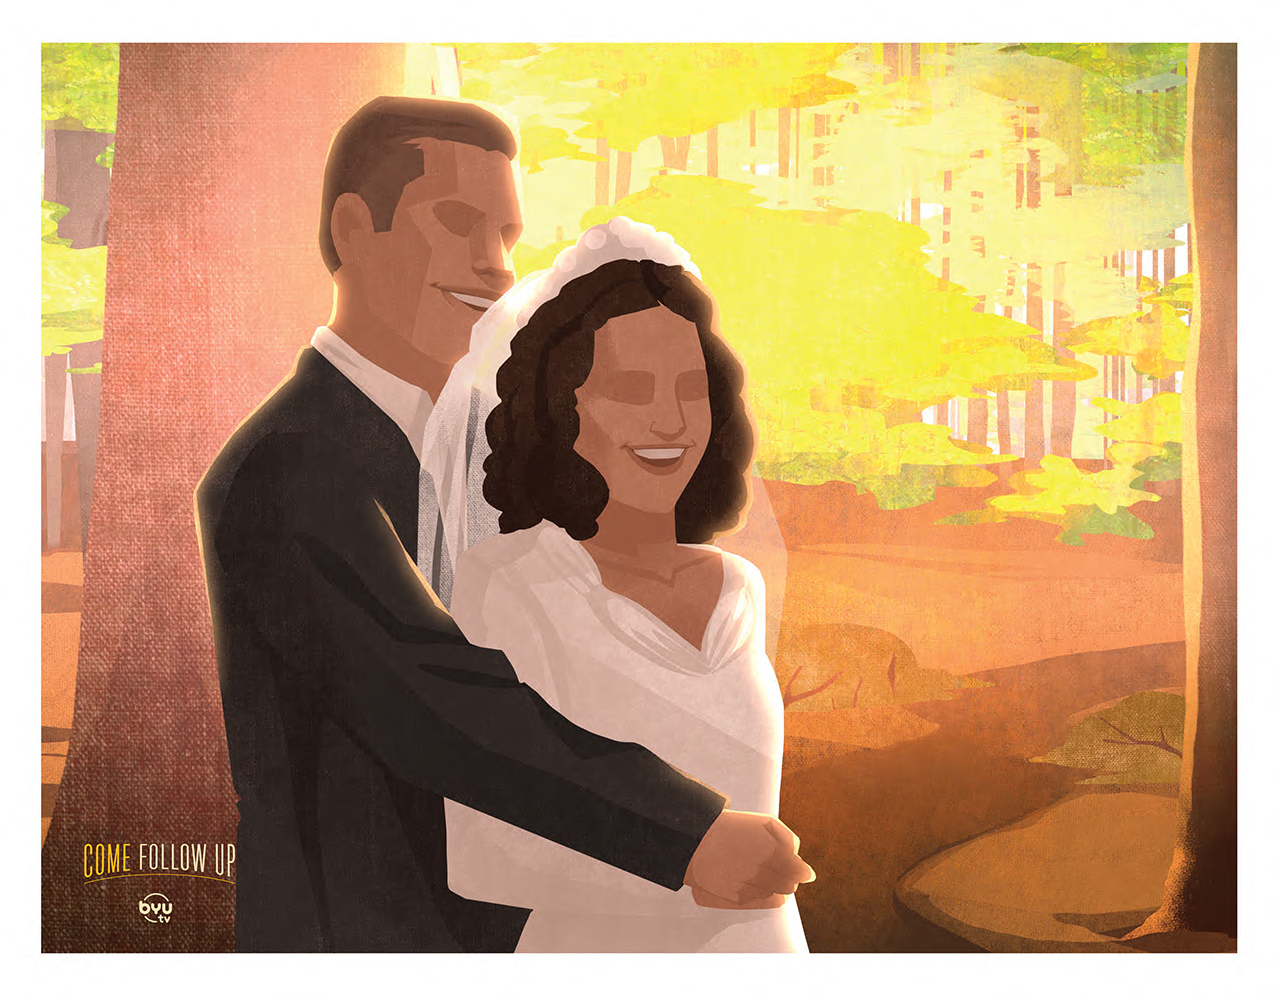 Stylized illustration of a couple in wedding clothes standing in a forest